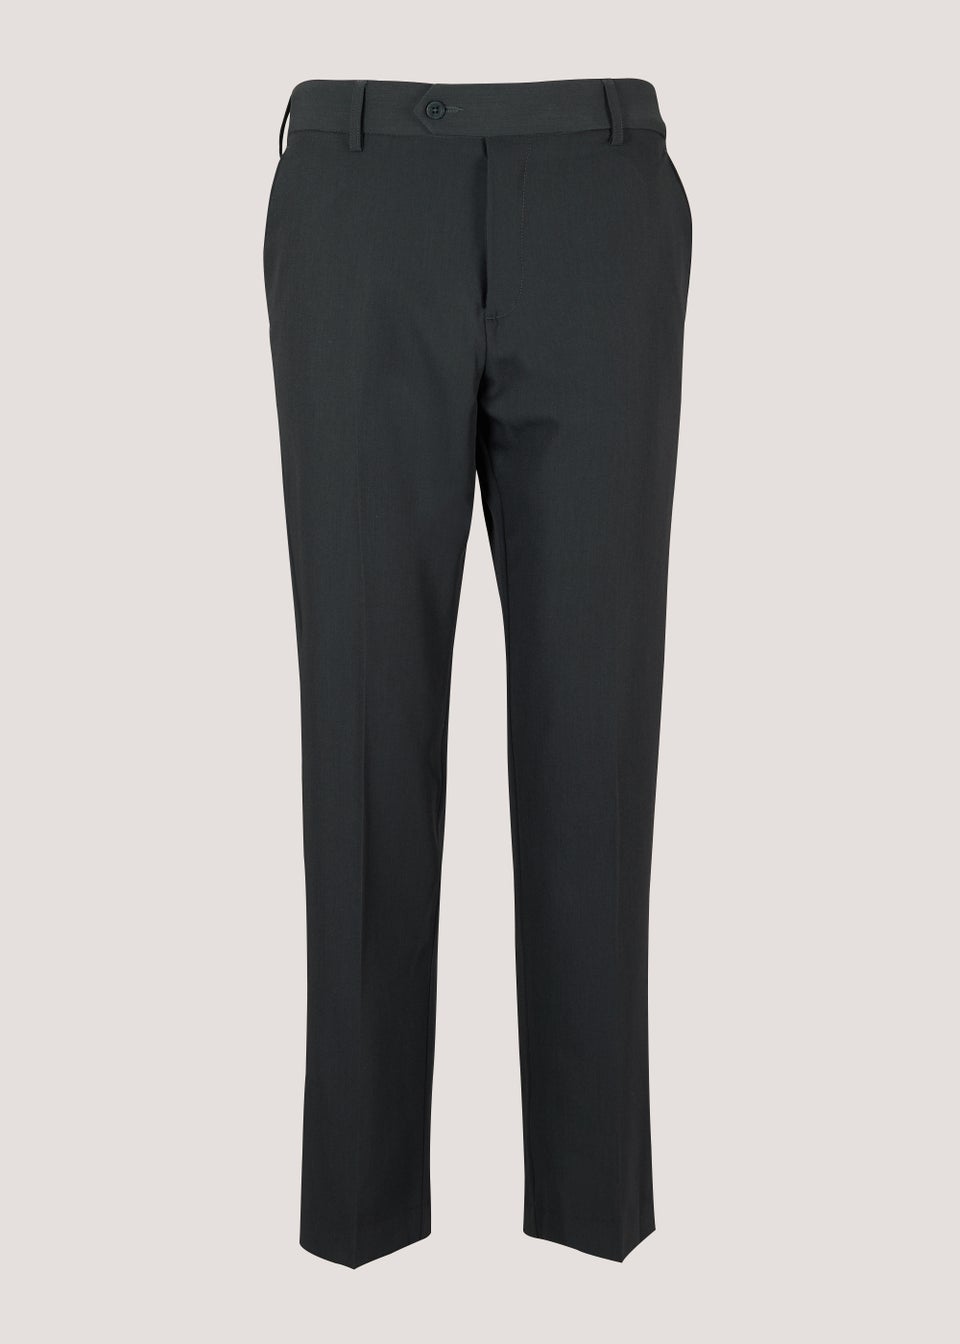 Farah Charcoal Stretch Active Waist Trousers